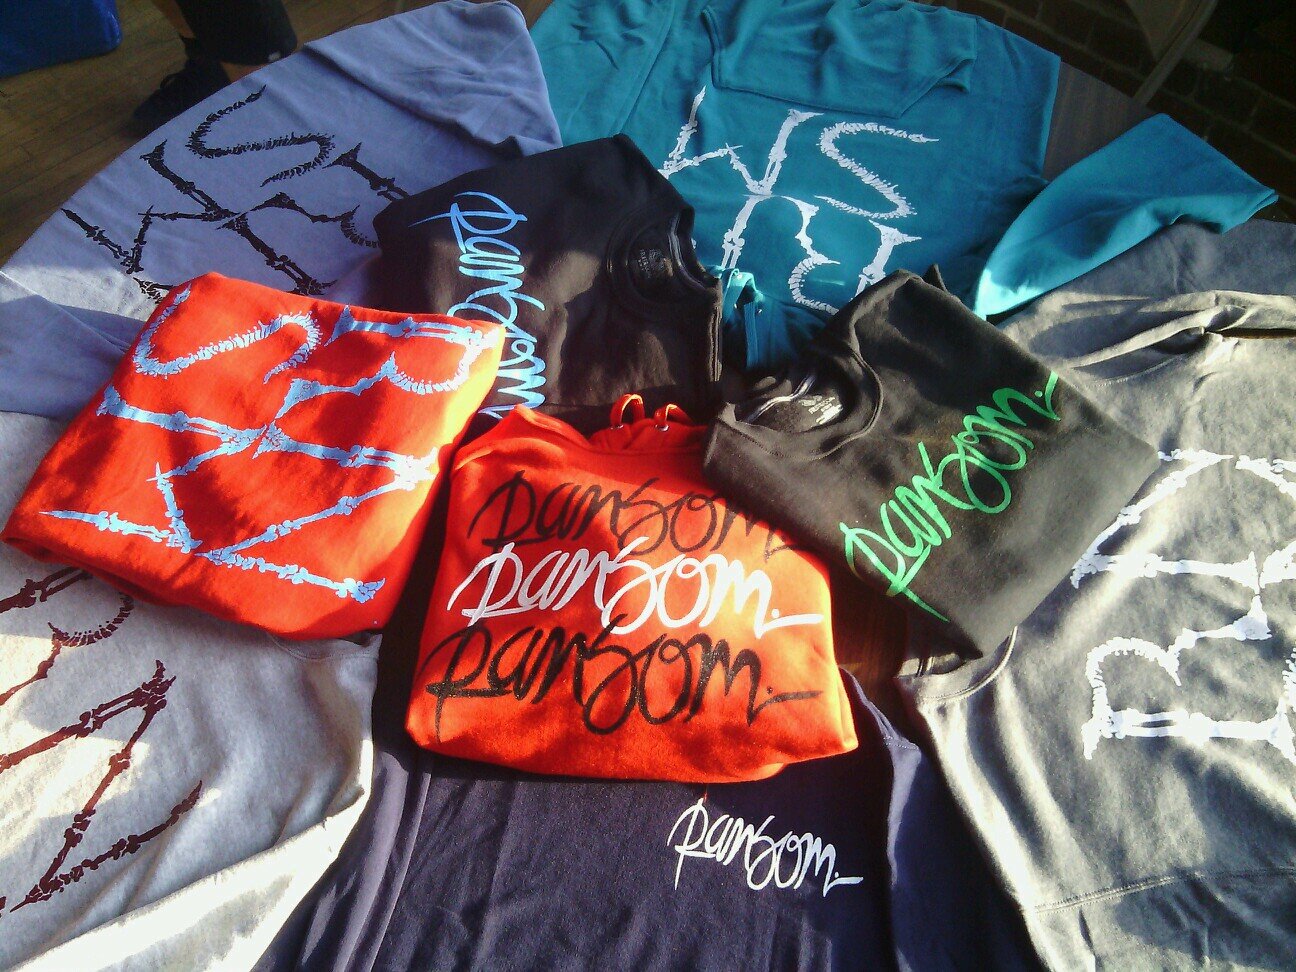 Ransom, we are a group of friwnds collaborating on shirt/Crewnecks/Pullovers& we make Strapbacks,Snapacks&Fitteds